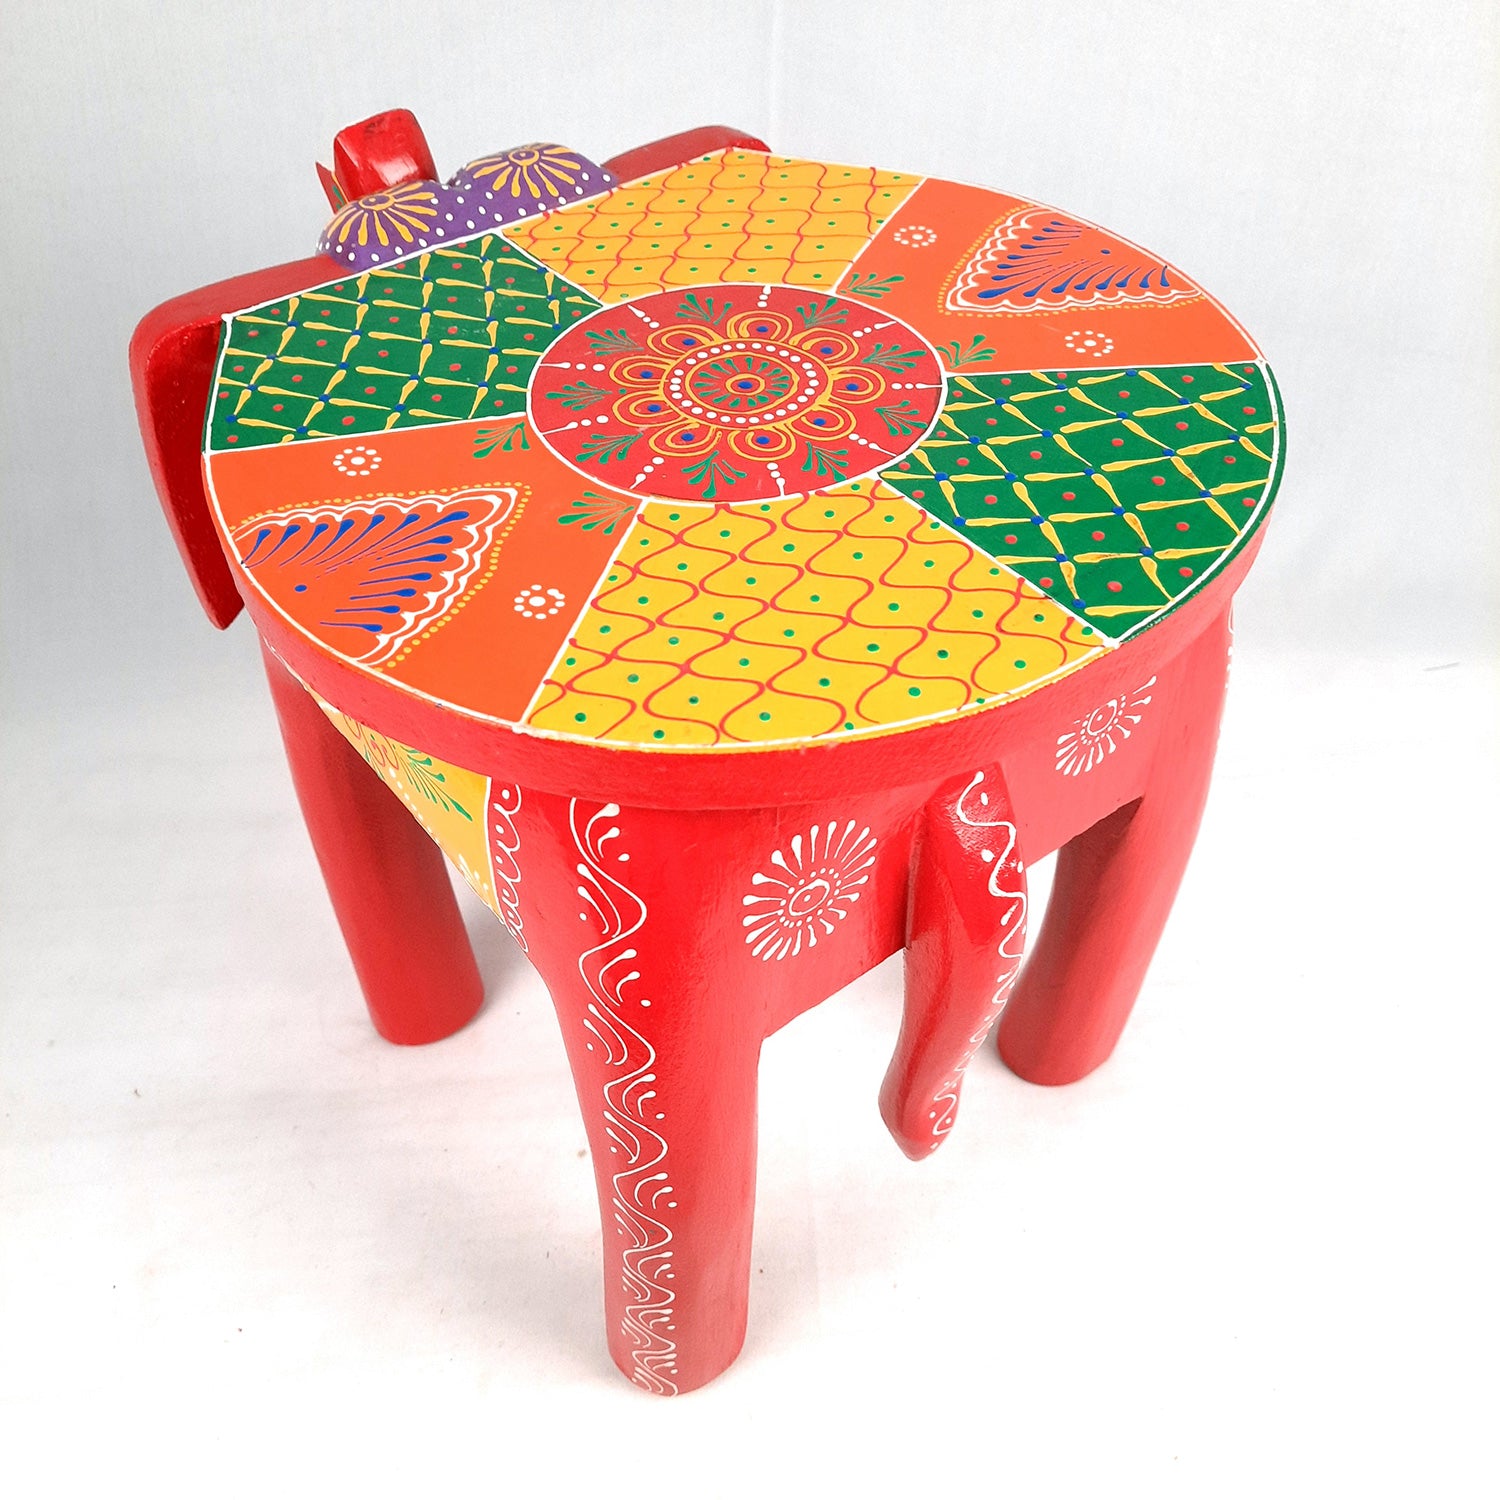 Side Table Cum Stool - Elephant Design | Wooden Small Stools for Keeping Lamp, Vases & Plants - for Home Decor, Corners, Sofa Side, Office & Gifts - 12 Inch - Apkamart